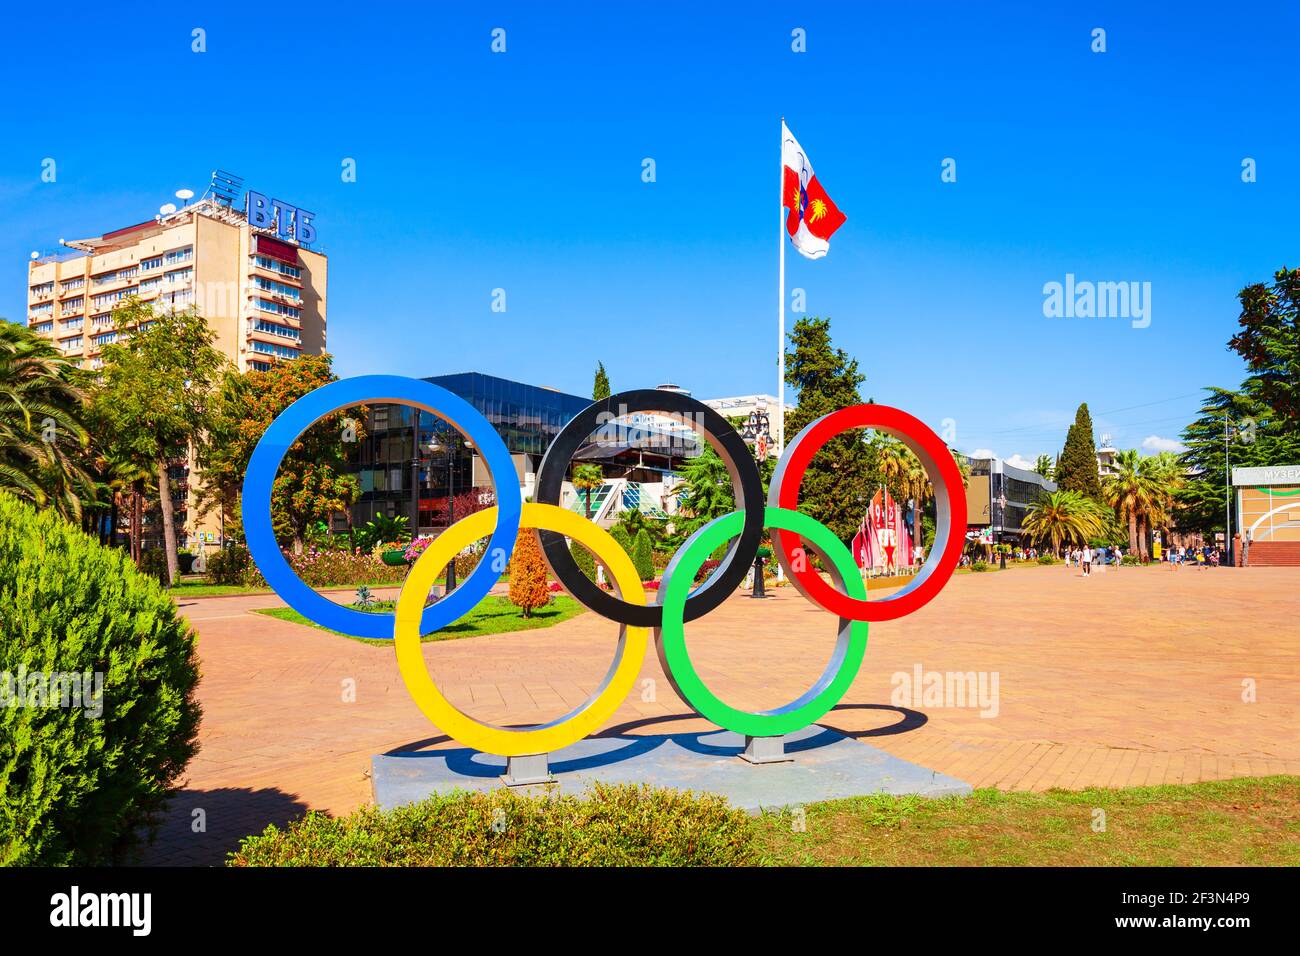 Sochi, Russia - October 04, 2020: Olympic rings logo and symbol monument at the Flag Square in the centre of Sochi resort city in Krasnodar Krai, Russ Stock Photo